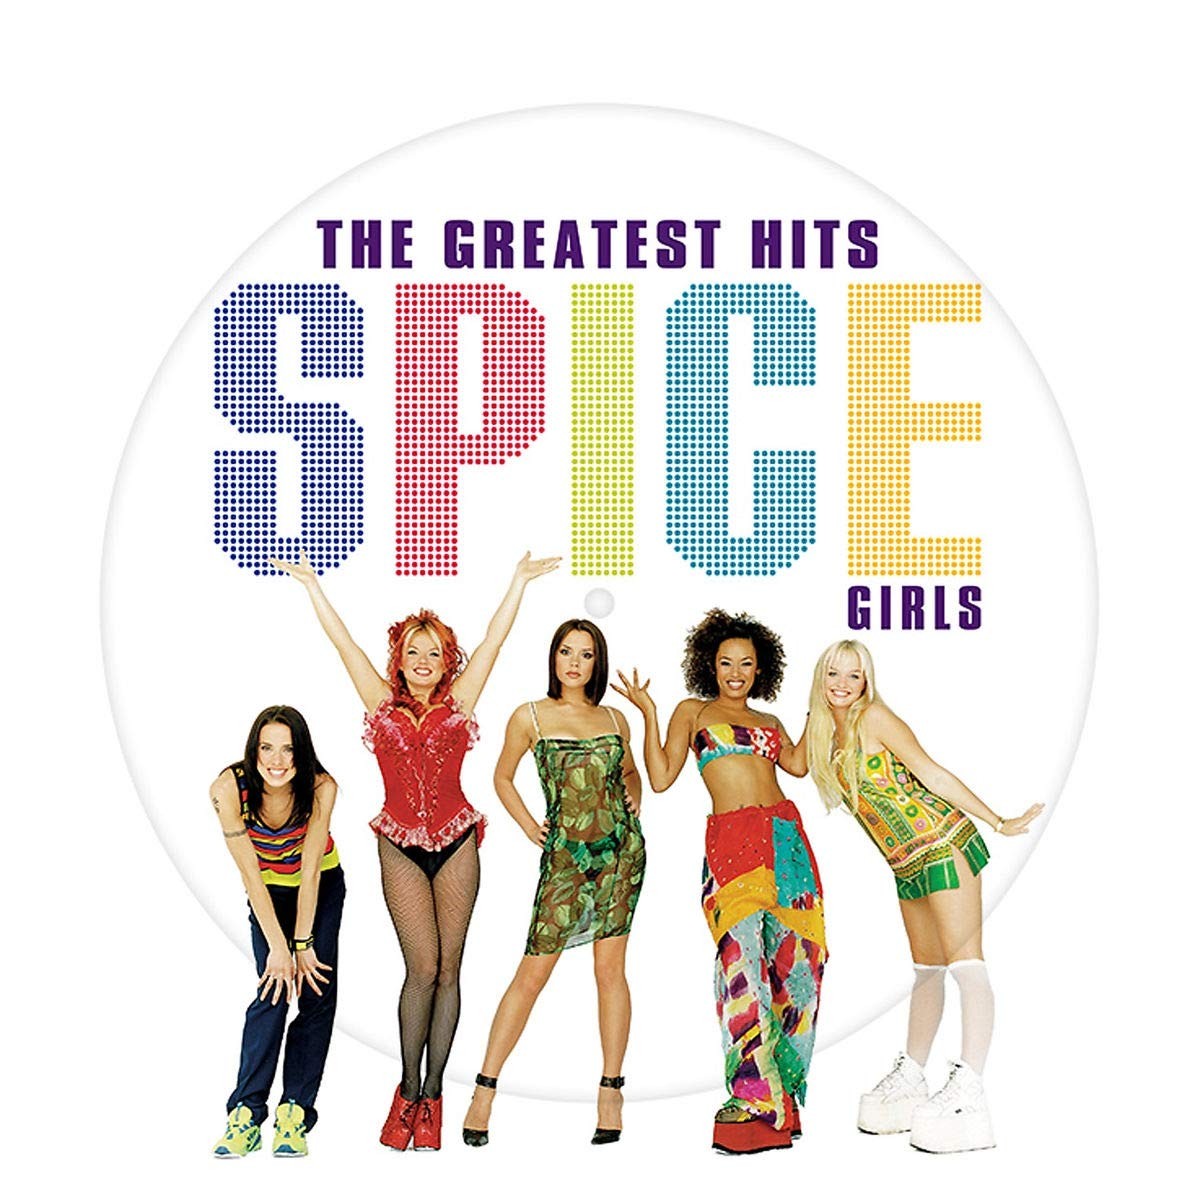 Spice Girls - The Greatest Hits (Picture Disc) Vinyl LP